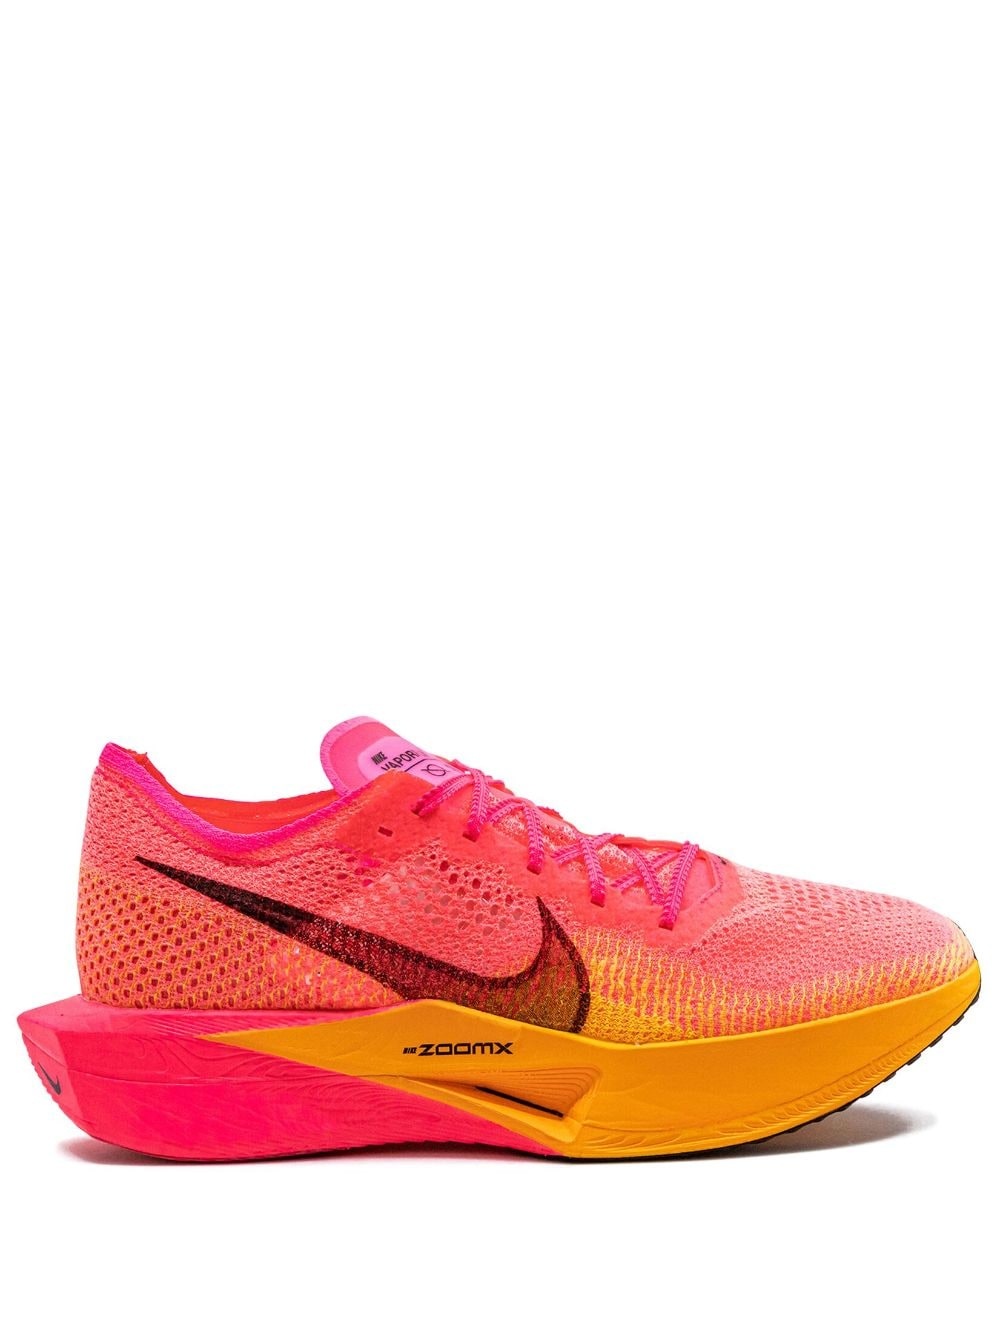 ZoomX Vaporfly Next% 3 sneakers - 1